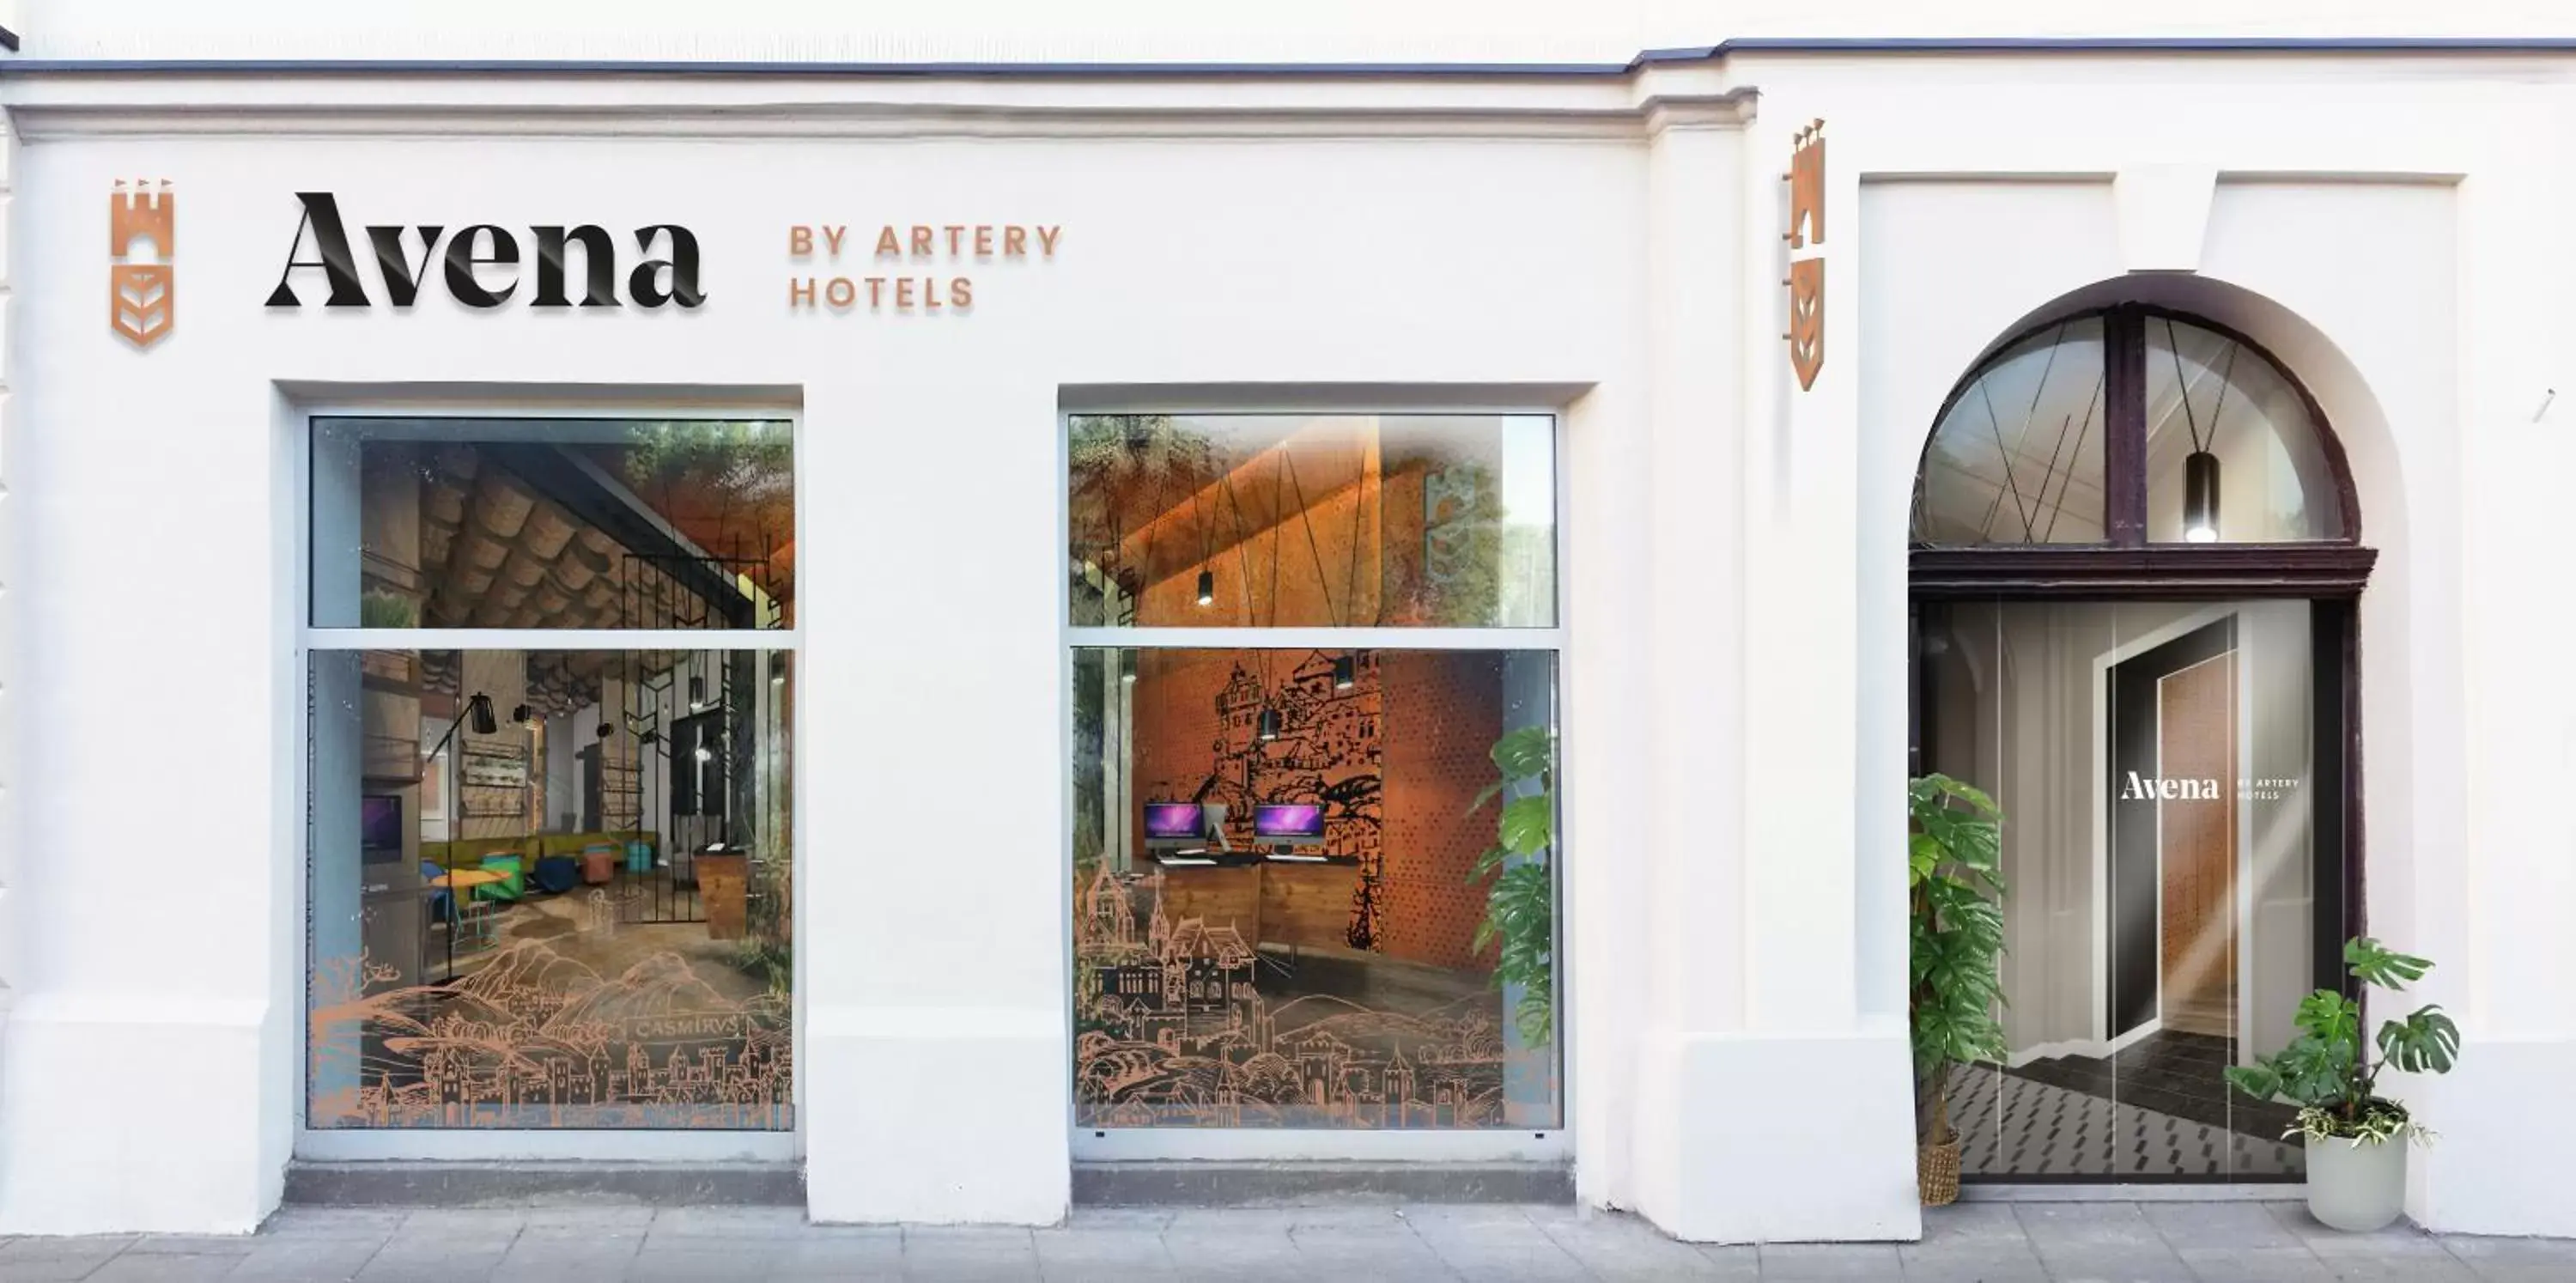 Property building in Avena Boutique Hotel by Artery Hotels